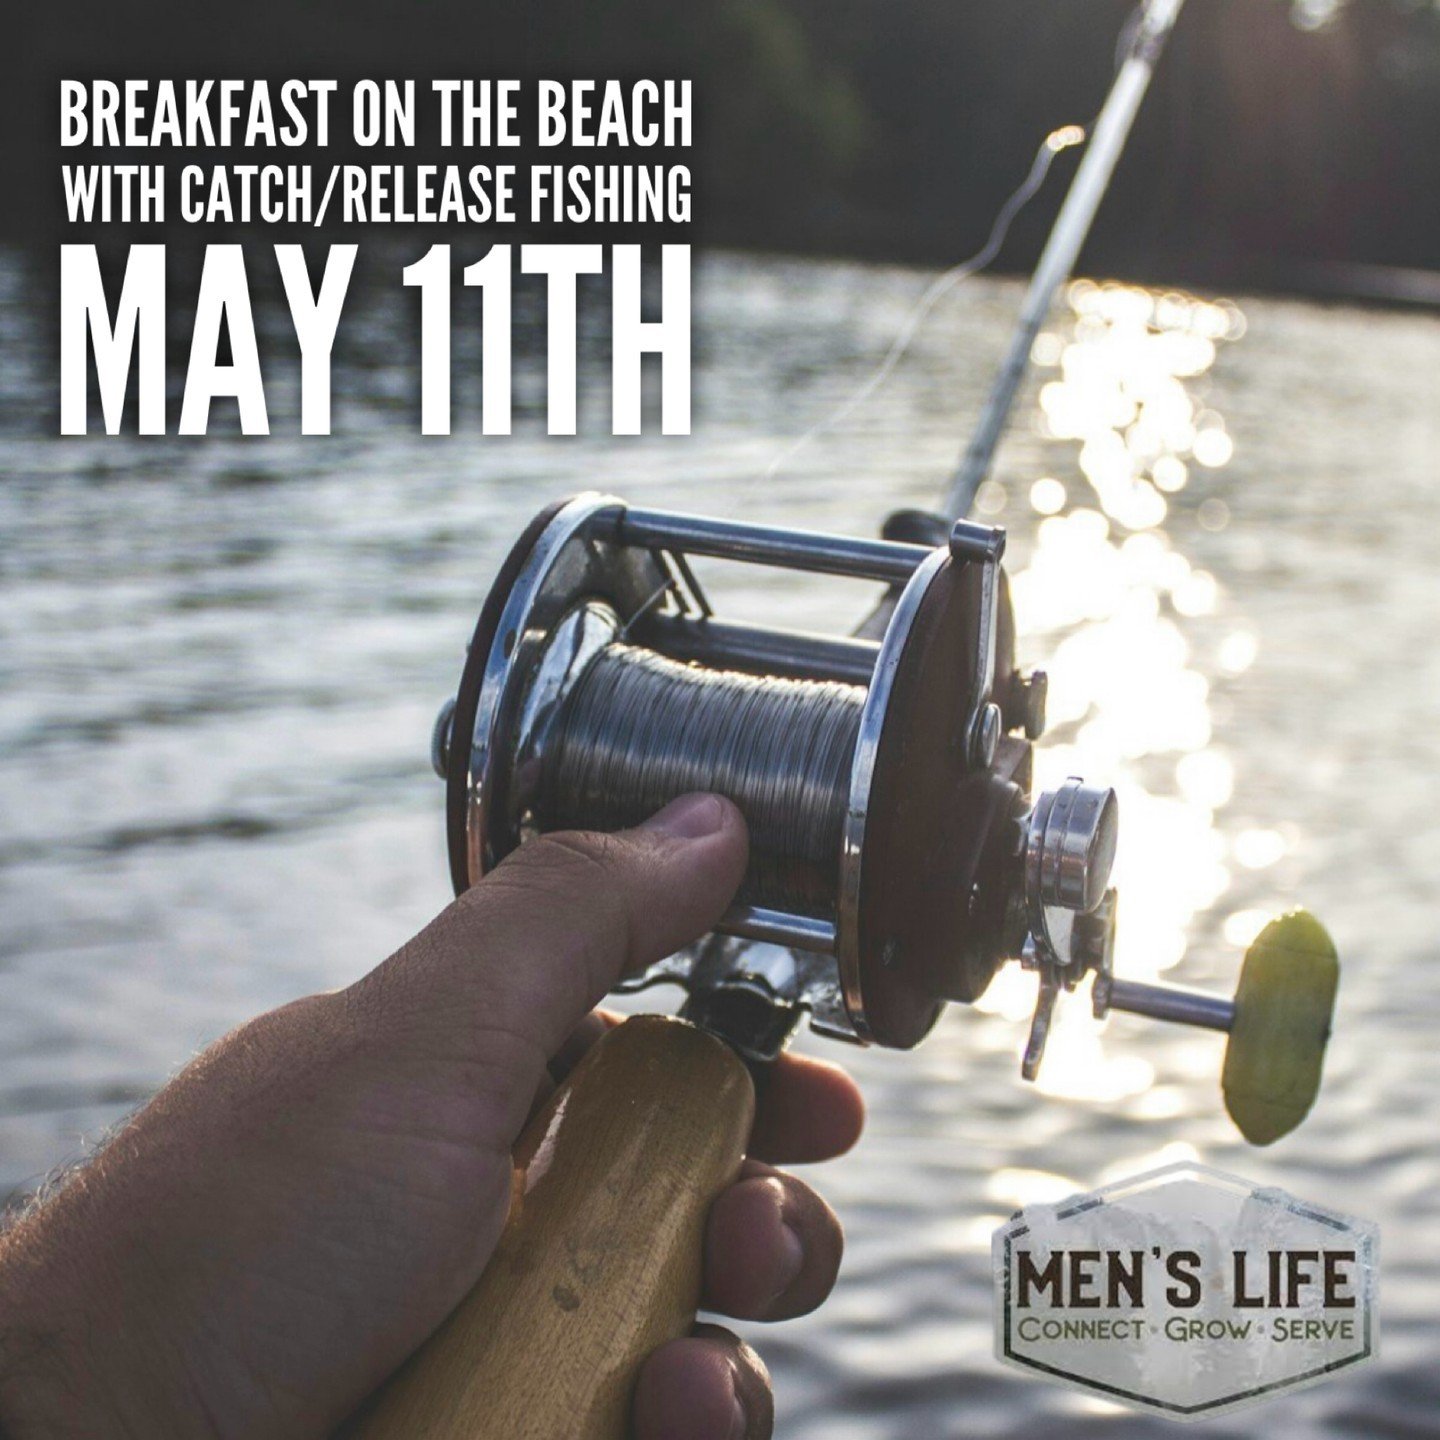 Men's Life monthly breakfast:  8:30 AM, May 11th. PLEASE NOTE we will be OFF SITE this month for a time of catch &amp; release fishing.  Call the church office to make your reservation.  We will notify you a few days prior to the event with the locat